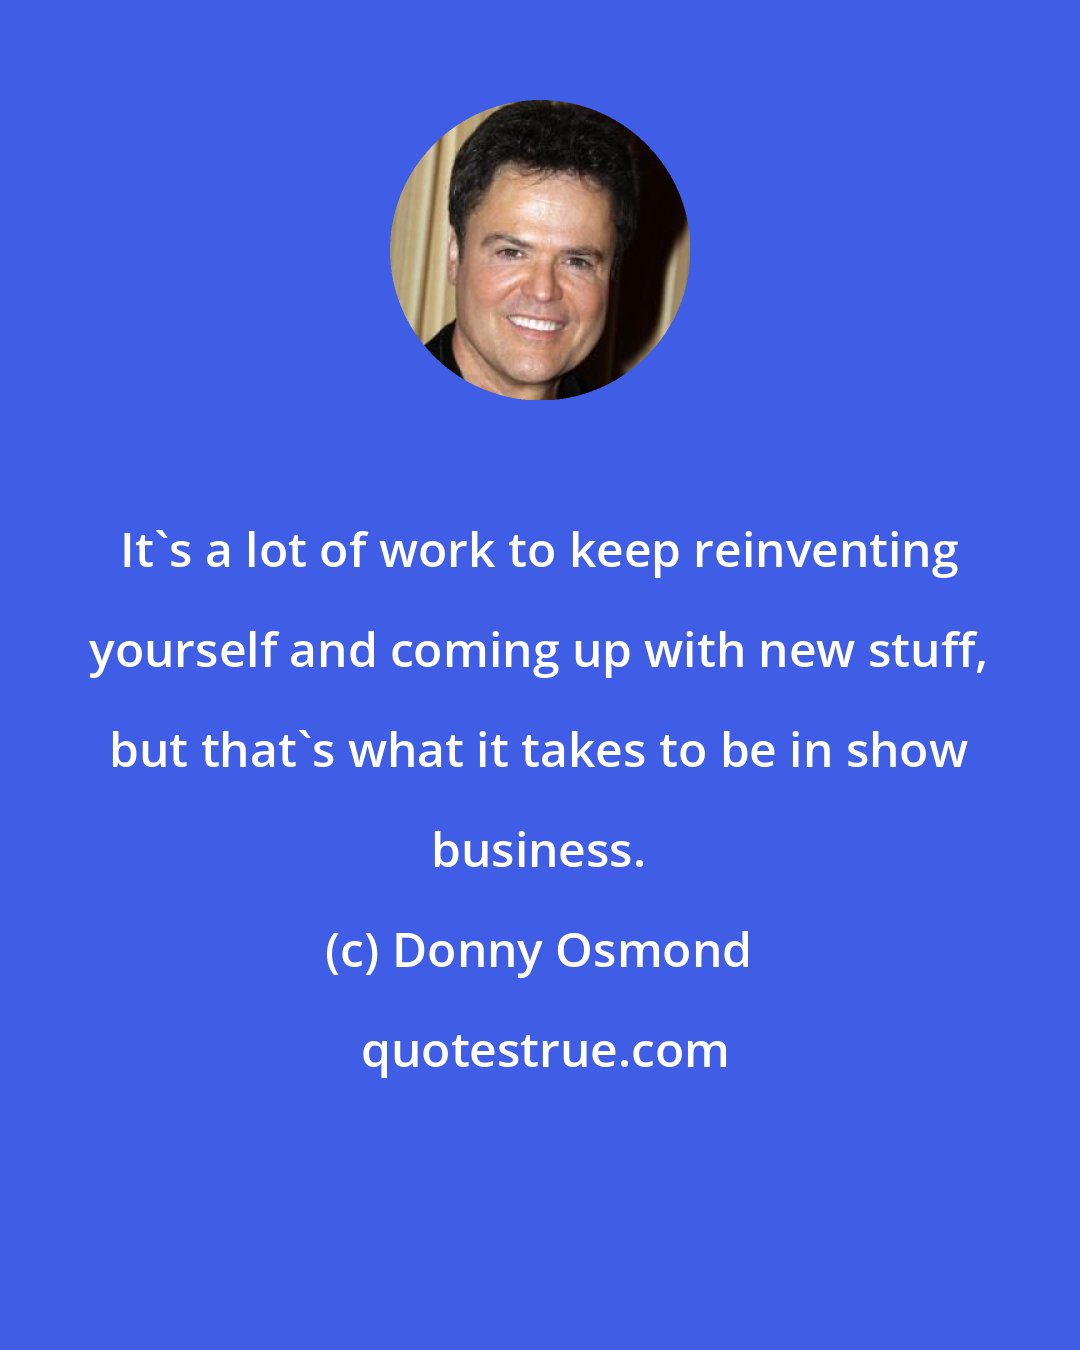 Donny Osmond: It's a lot of work to keep reinventing yourself and coming up with new stuff, but that's what it takes to be in show business.